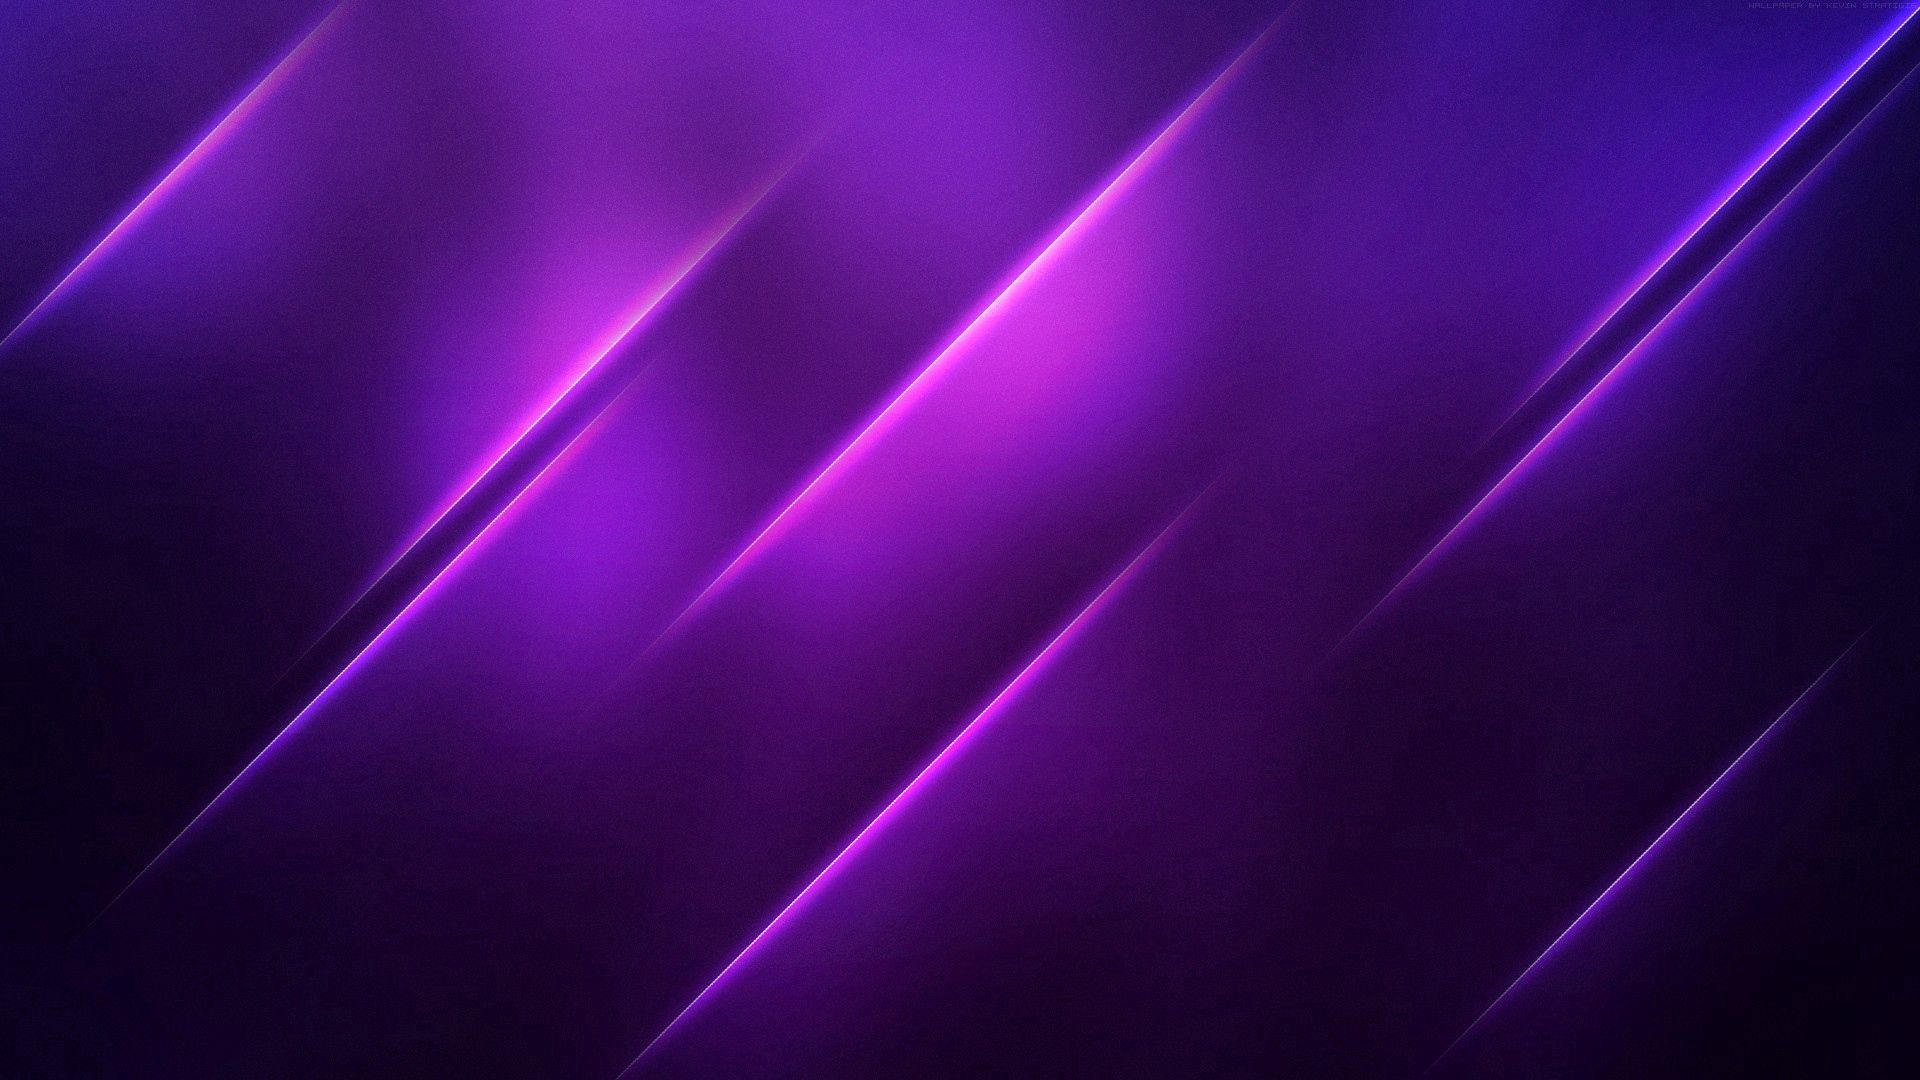 HD wallpaper purple, violet, obliquely, abstract, bright, lines